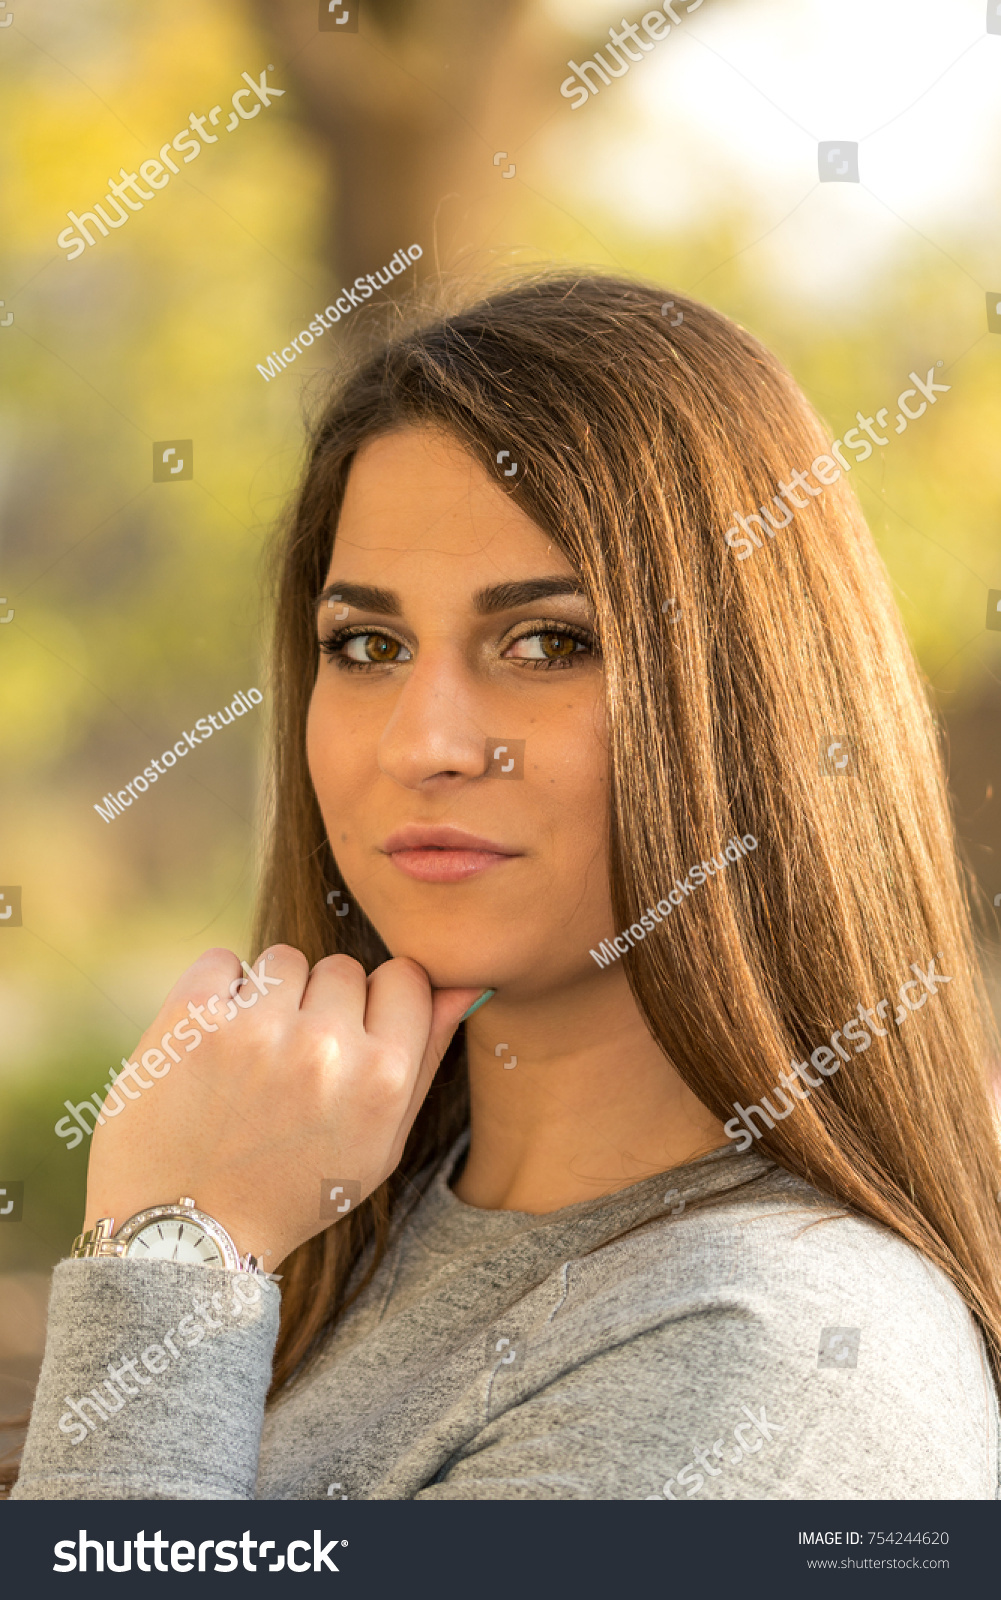 Beautiful young smiling girl headshot portrait with blurred background. #754244620